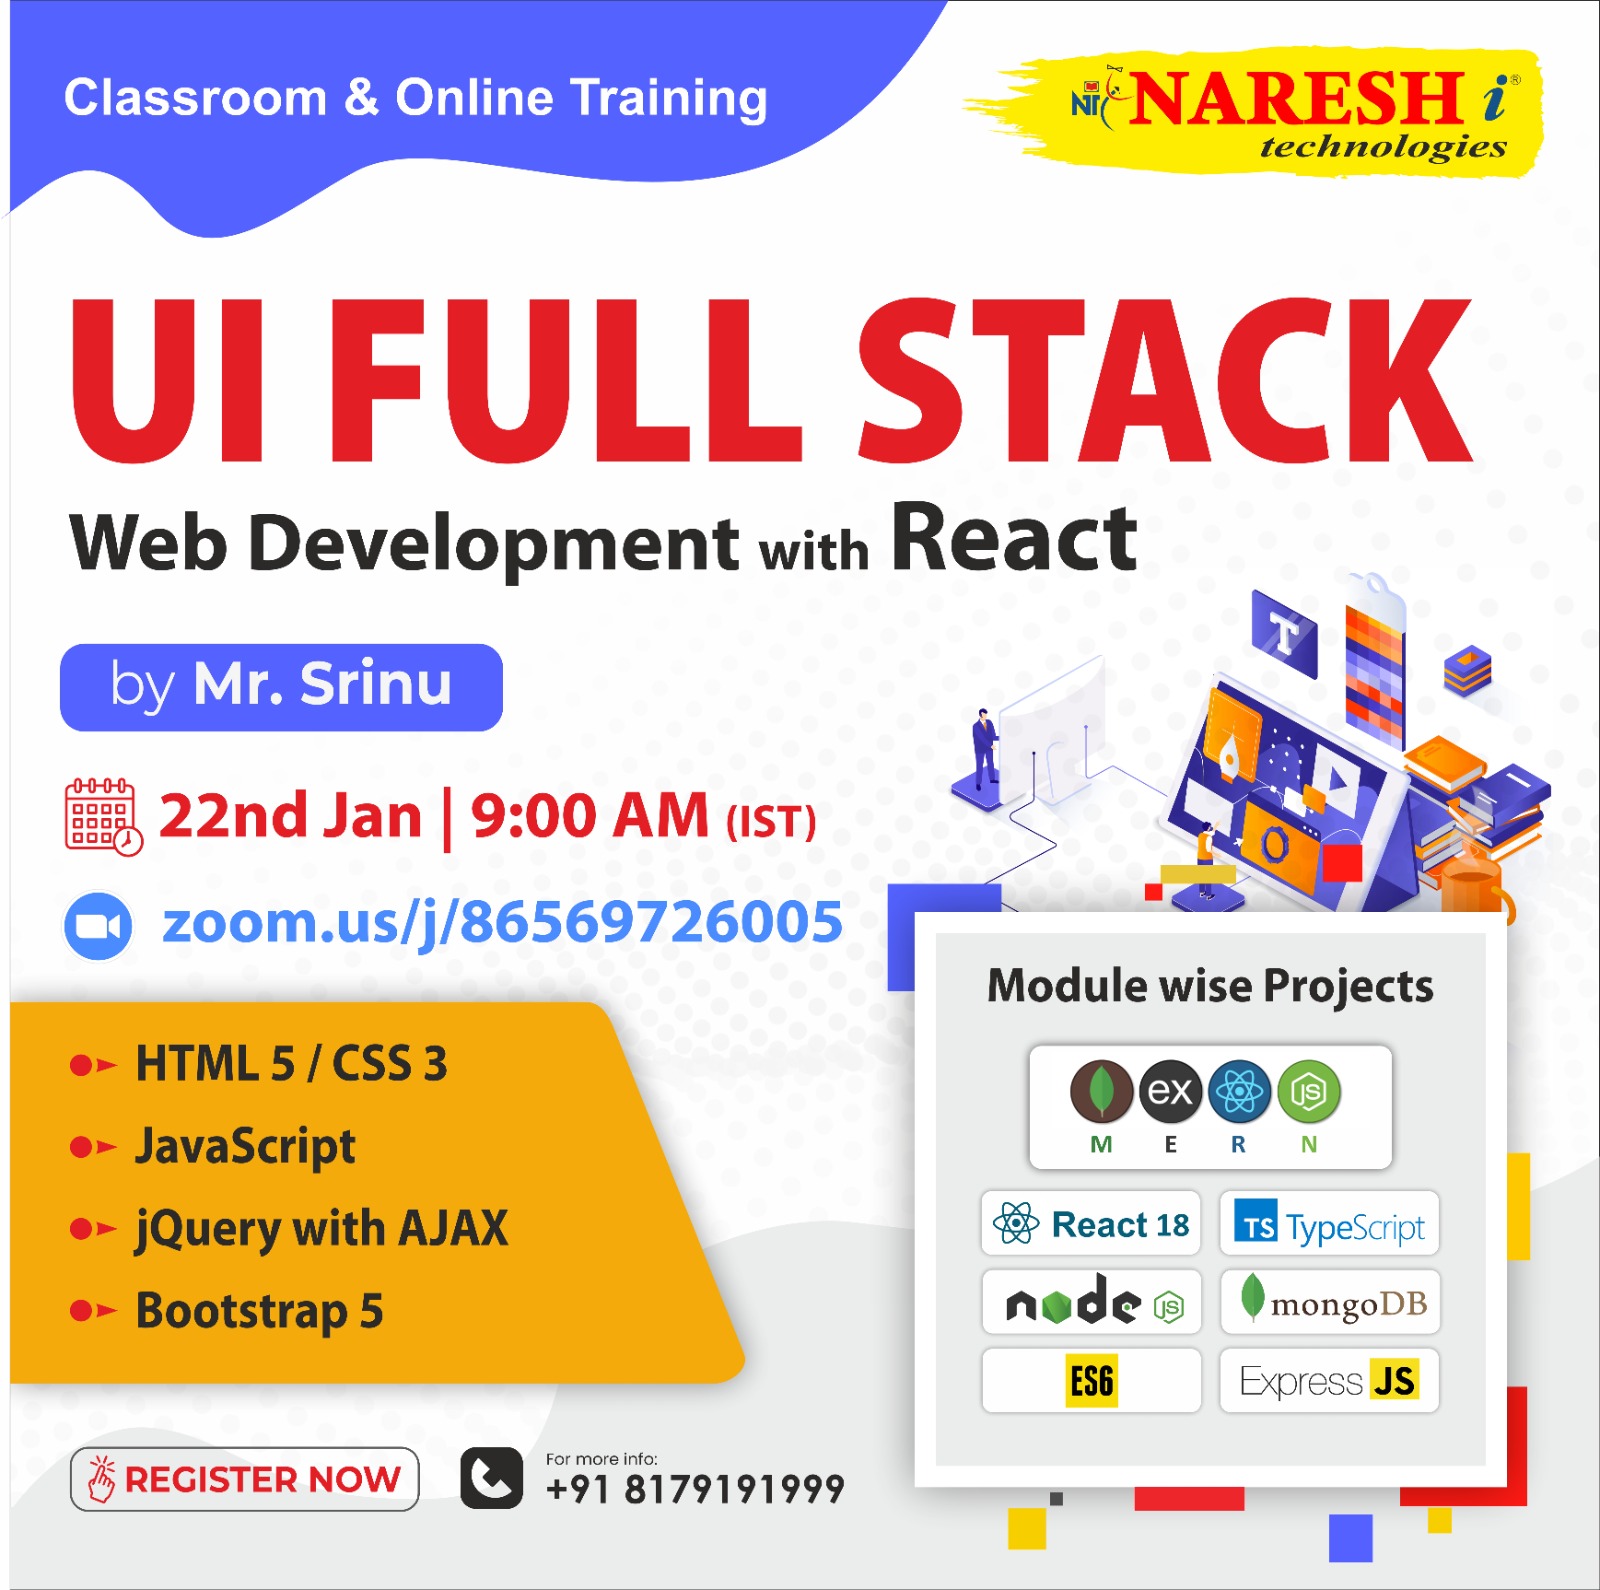 Learn UI Full Stack Web with React JS Course in NareshIT, Online Event